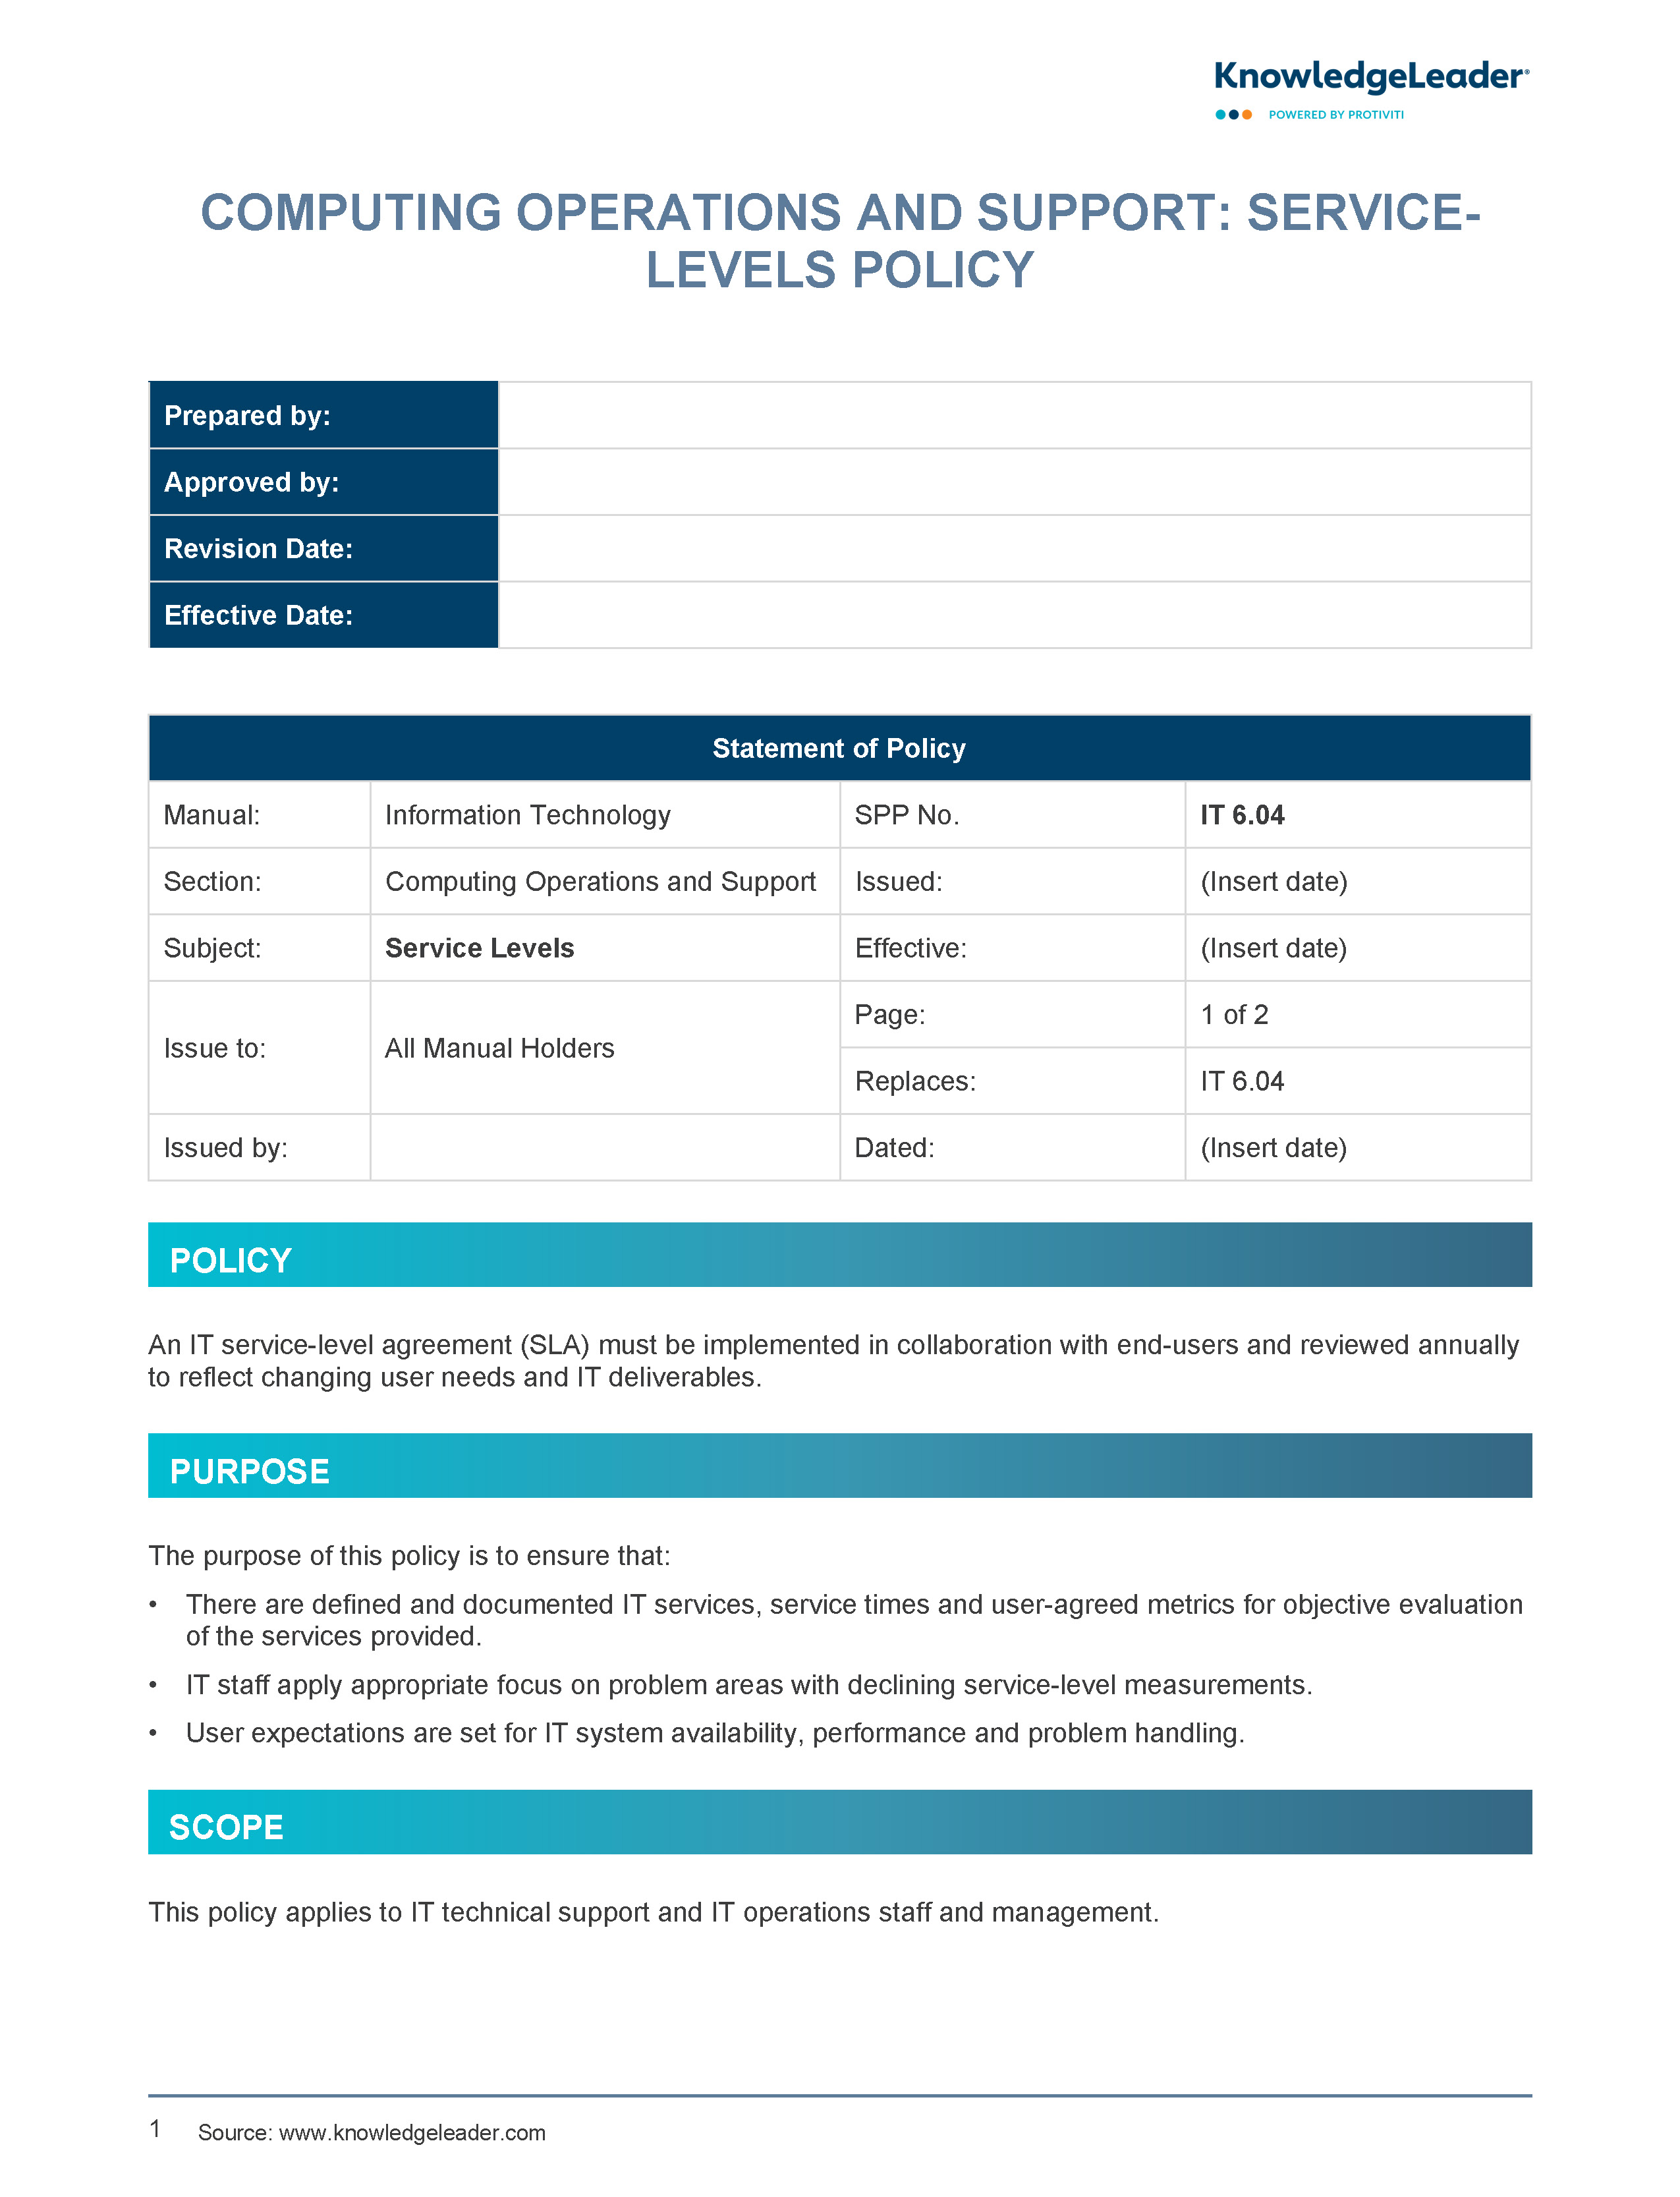 Screenshot of the first page of Computing Operations and Support: Service-Levels Policy